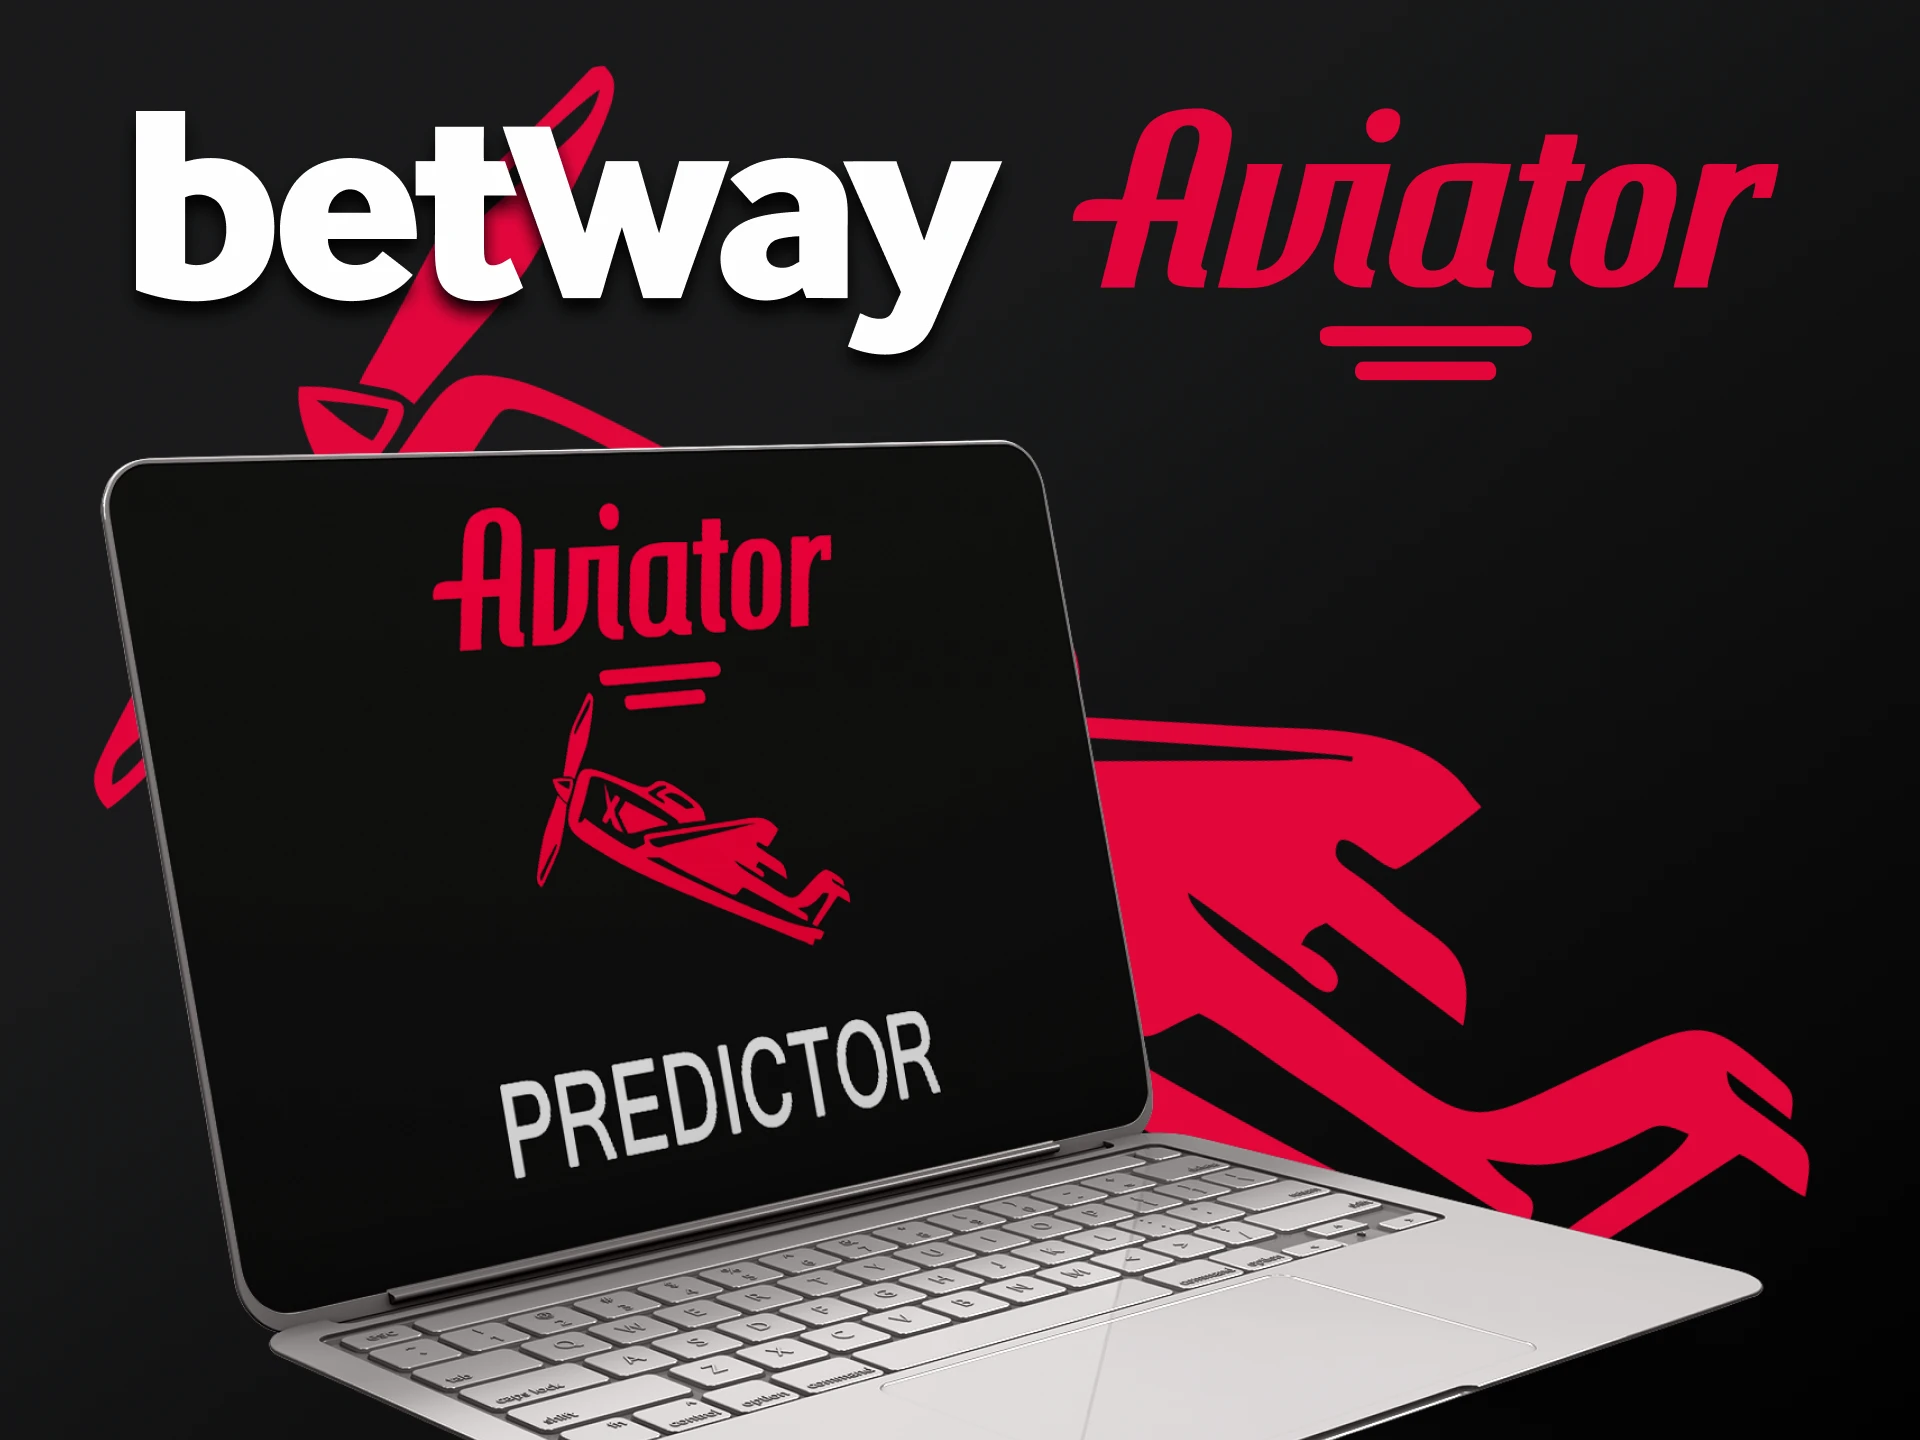 Aviator Predictor Download for Android (APK) and iOS in Sri Lanka